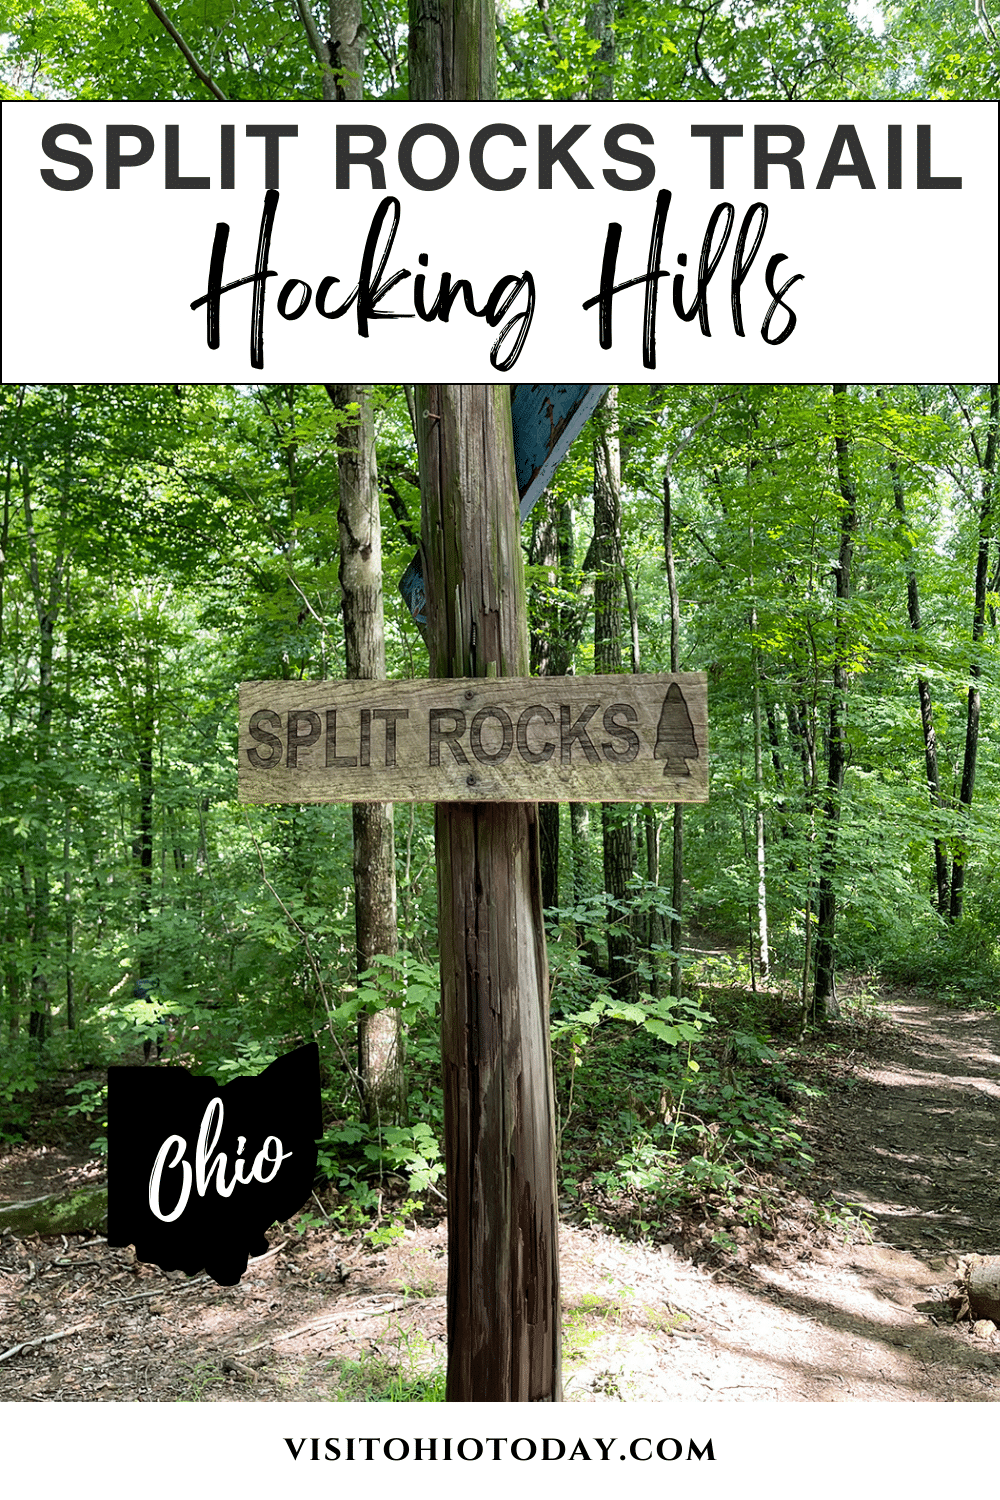 Split Rocks Trail Hocking Hills takes you through Camp Oty’Okwa Old-Growth Forest, a 200 acre forest within 737 acres of land owned by Big Brothers Big Sisters of Central Ohio.